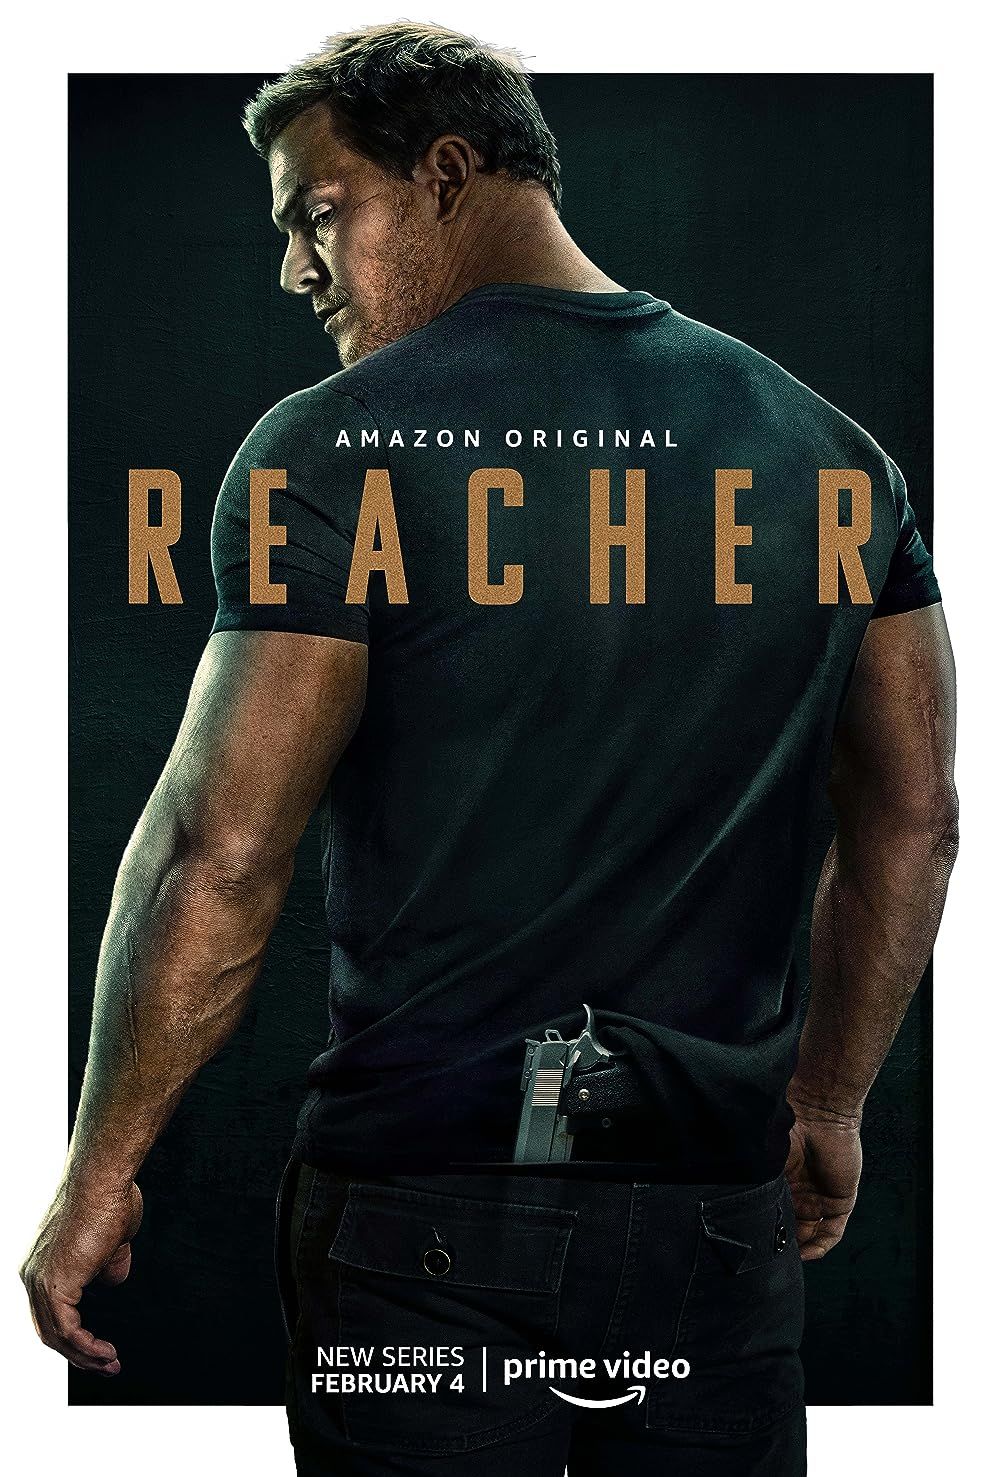 Reacher' Release Schedule: When Do New Episodes Come Out?